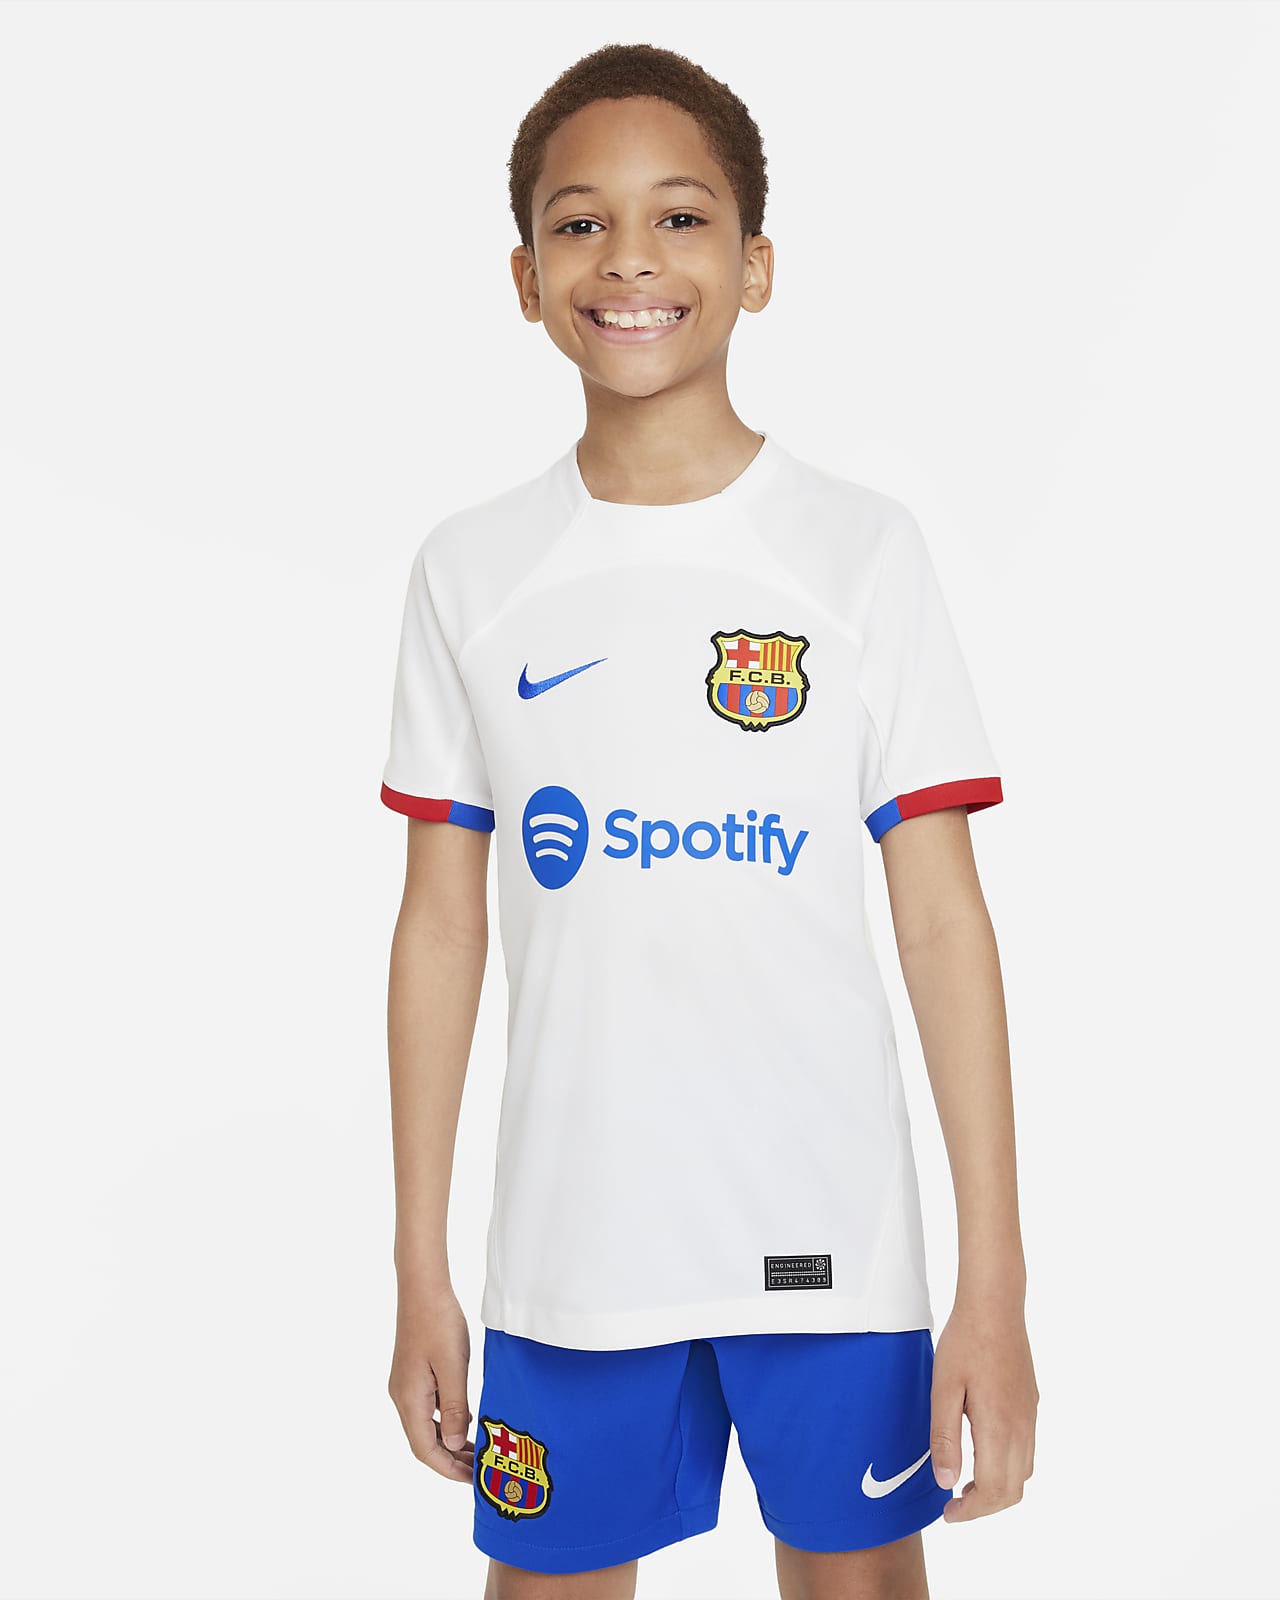 Boys Sports Gifts,Kids Soccer Jersey Shorts and Boys Soccer - Import It All